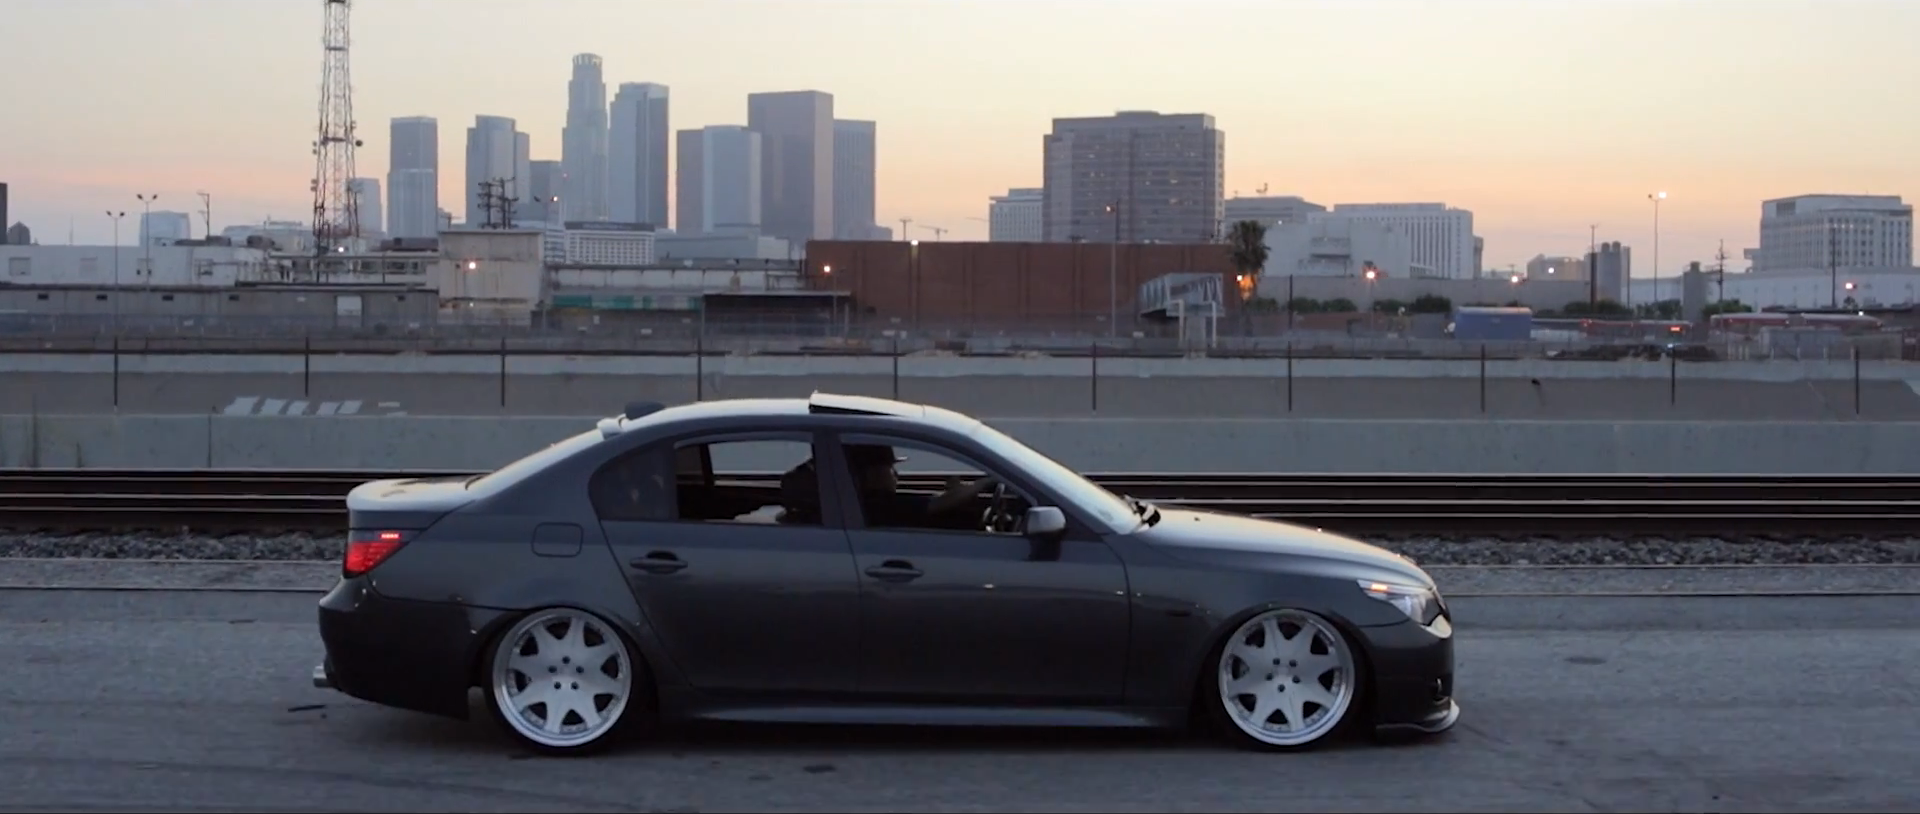 bagged-bmw-e60-528i-tears-the-streets-of-la-video-64983_1.png